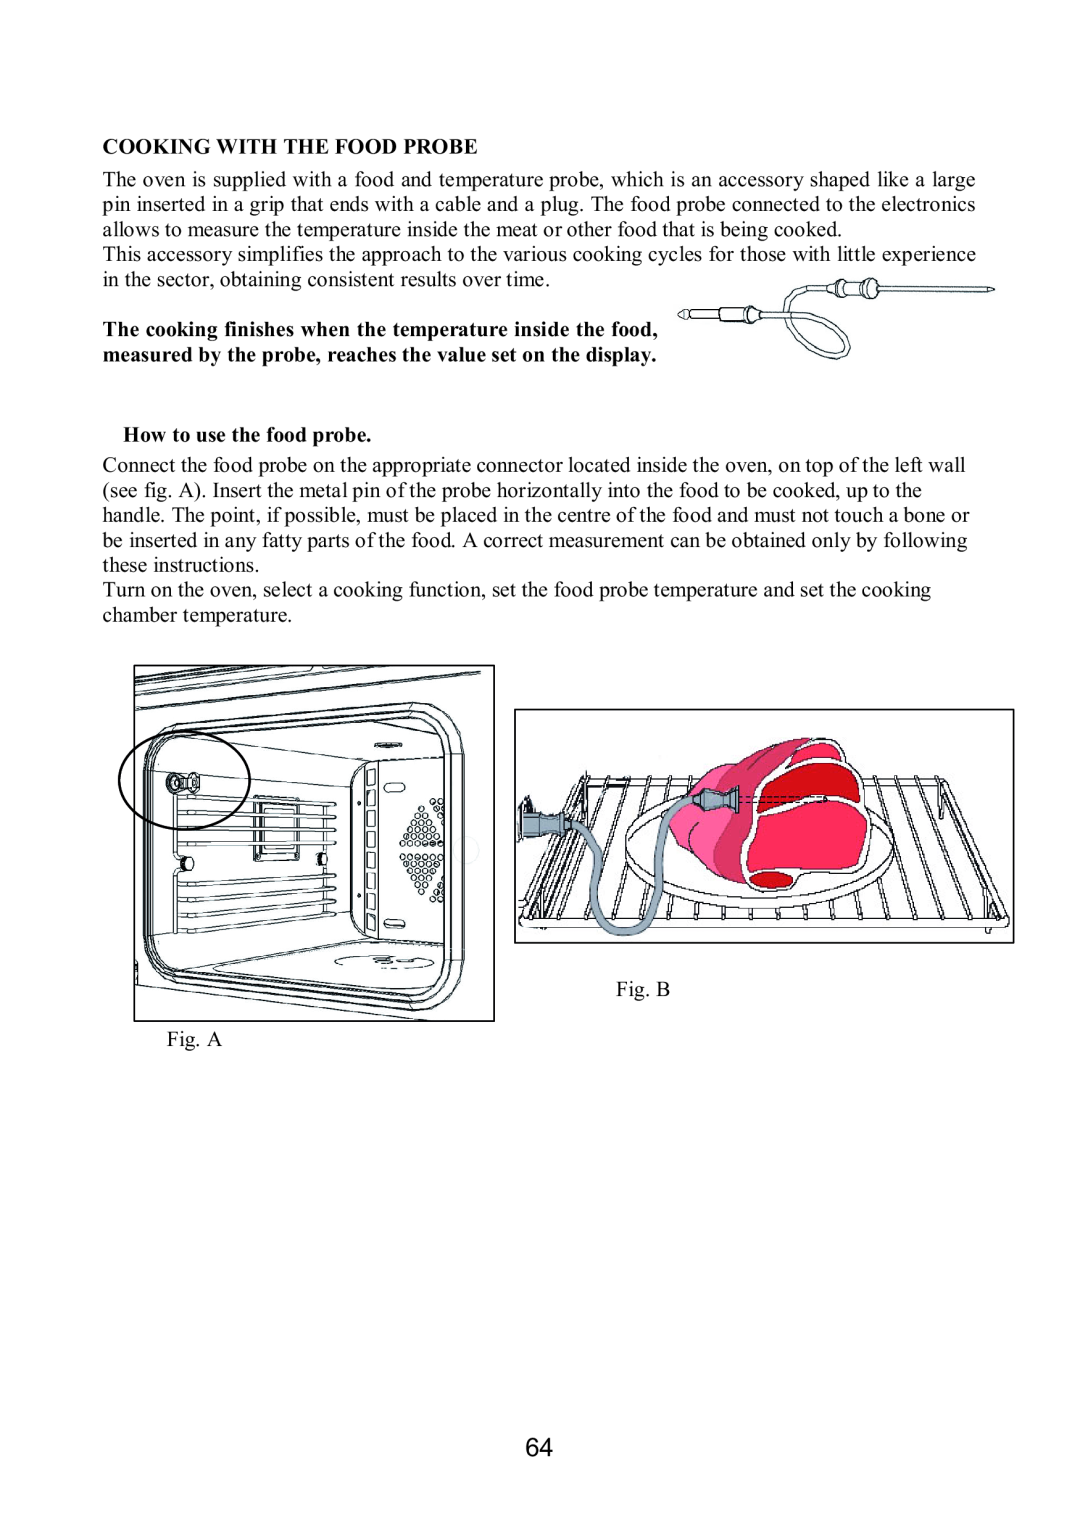 Foster S4000 user manual Cooking With The Food Probe, How to use the food probe 